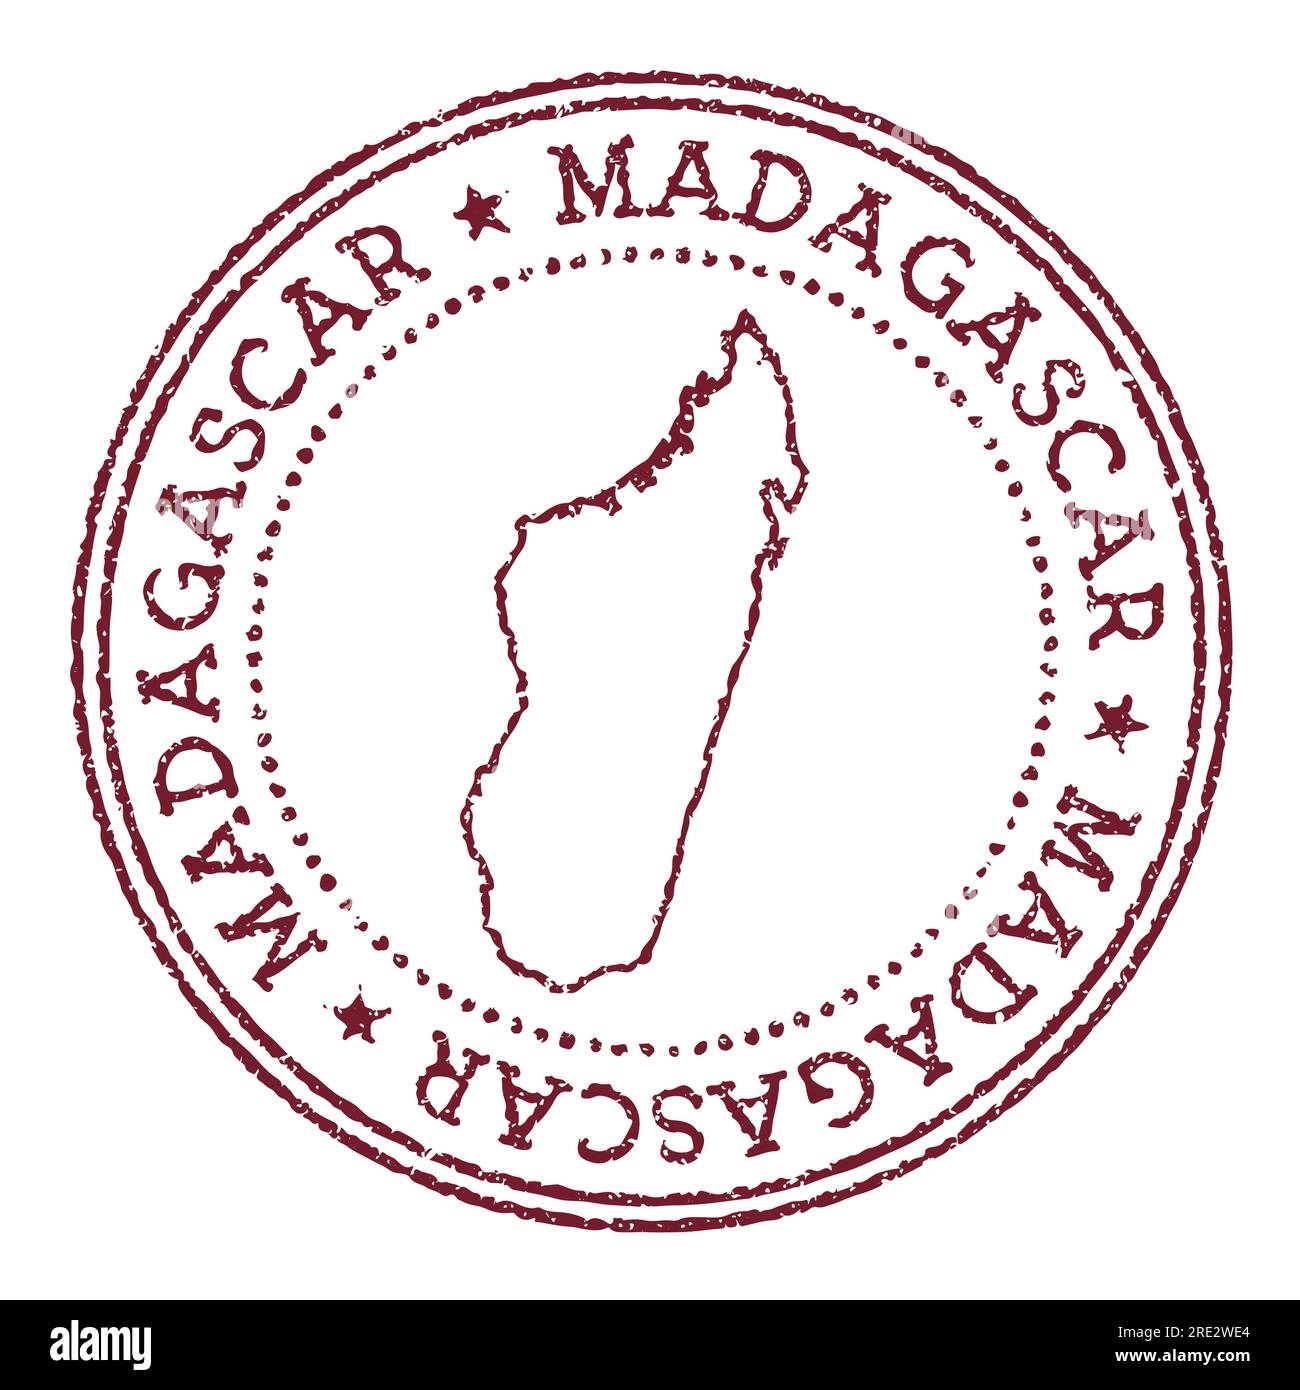 Madagascar round rubber stamp with country map. Vintage red passport stamp with circular text and stars, vector illustration. Stock Vector